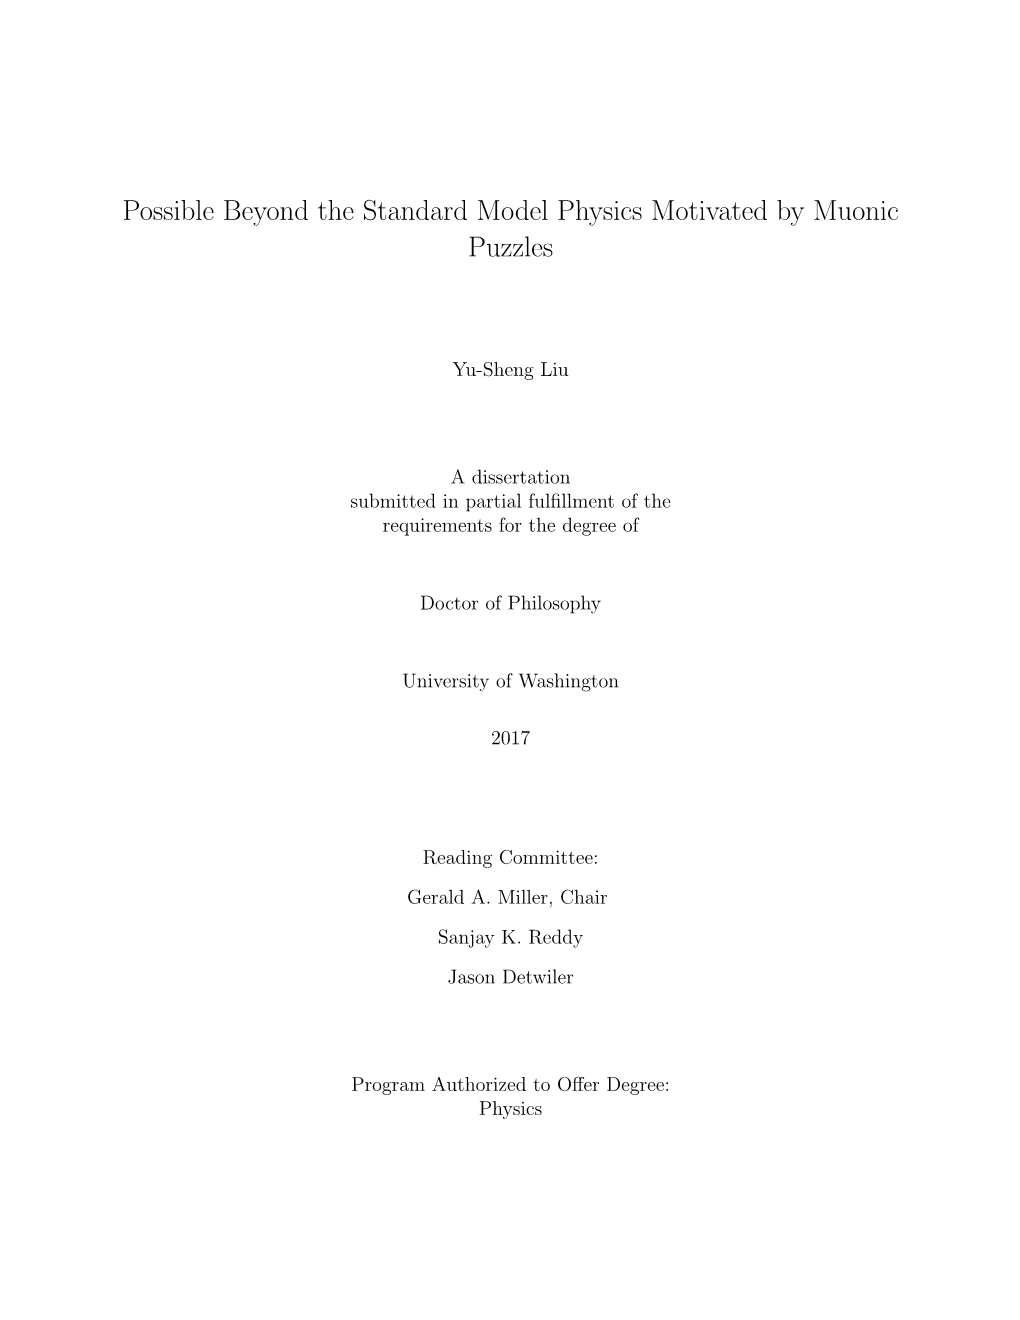 Possible Beyond the Standard Model Physics Motivated by Muonic Puzzles